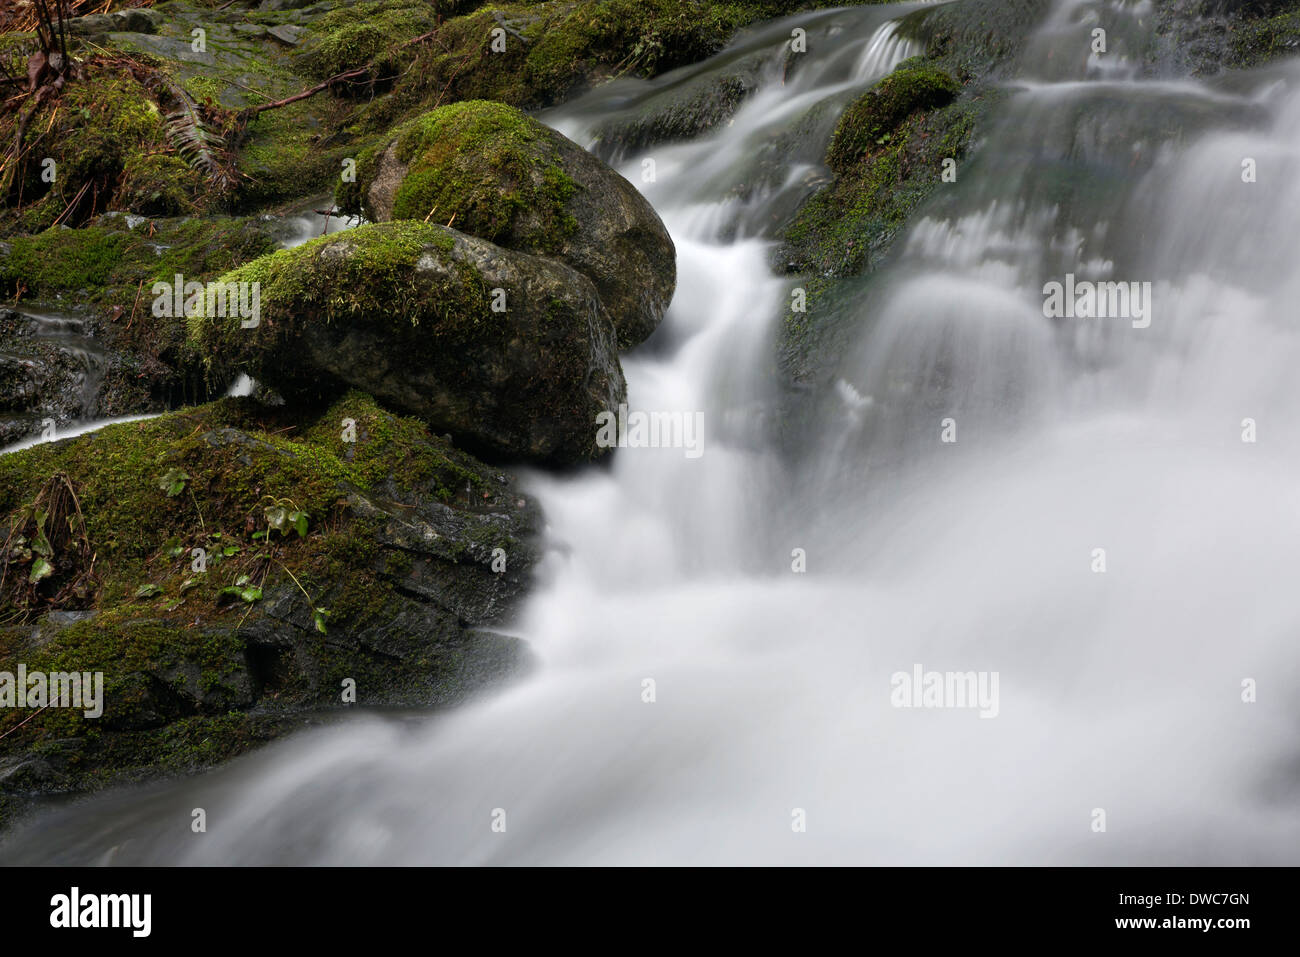 WASHINGTON - Moss covered rocks along the banks of Small Falls in Wallace Falls State Park near Gold Bar. Stock Photo